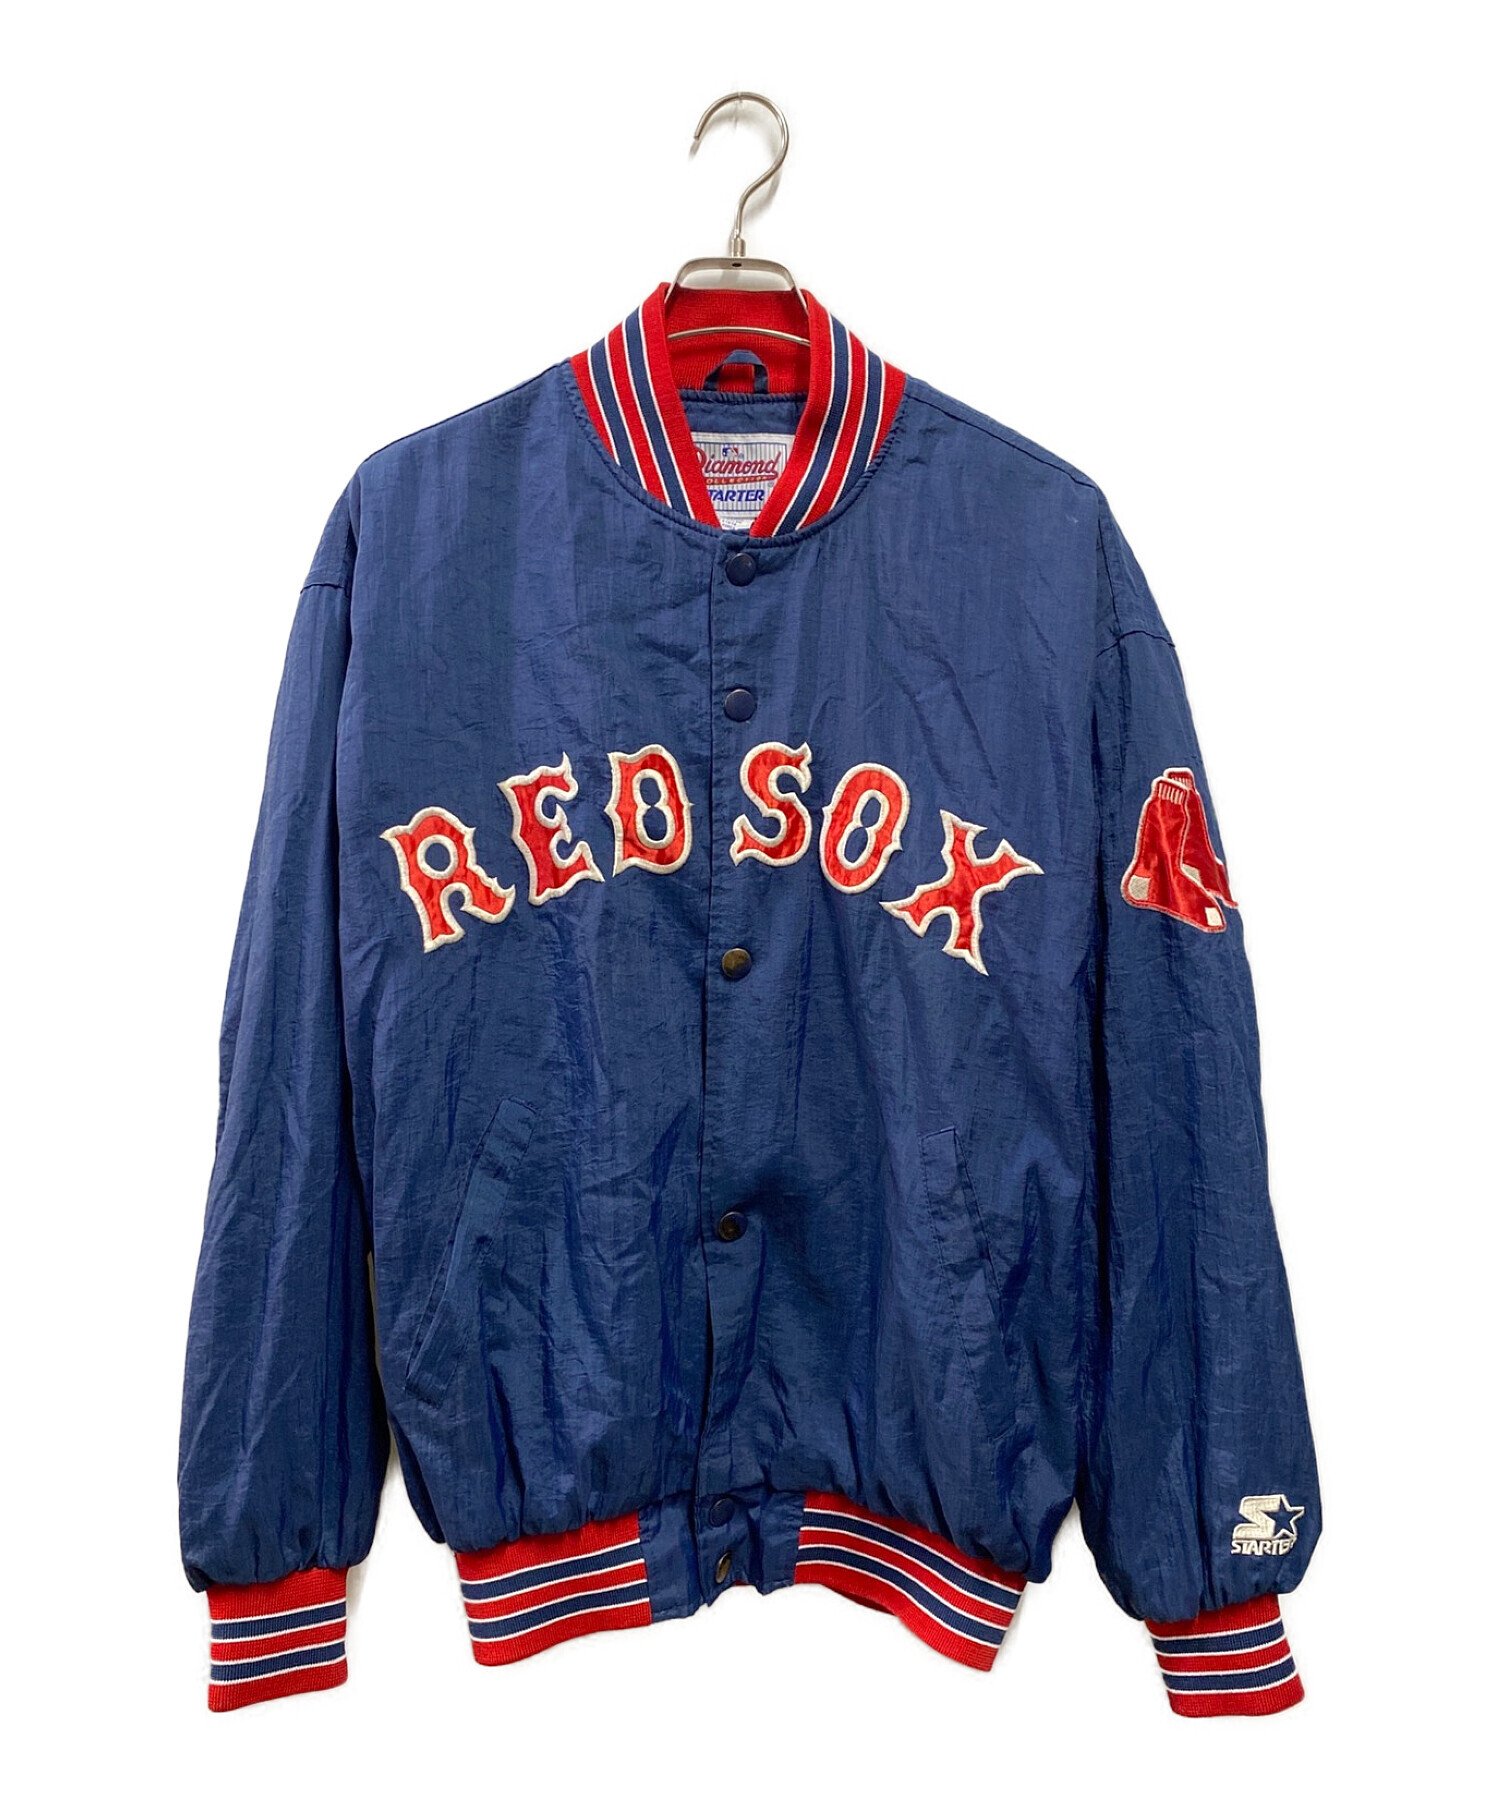 RED SOX スタジャン（古着）